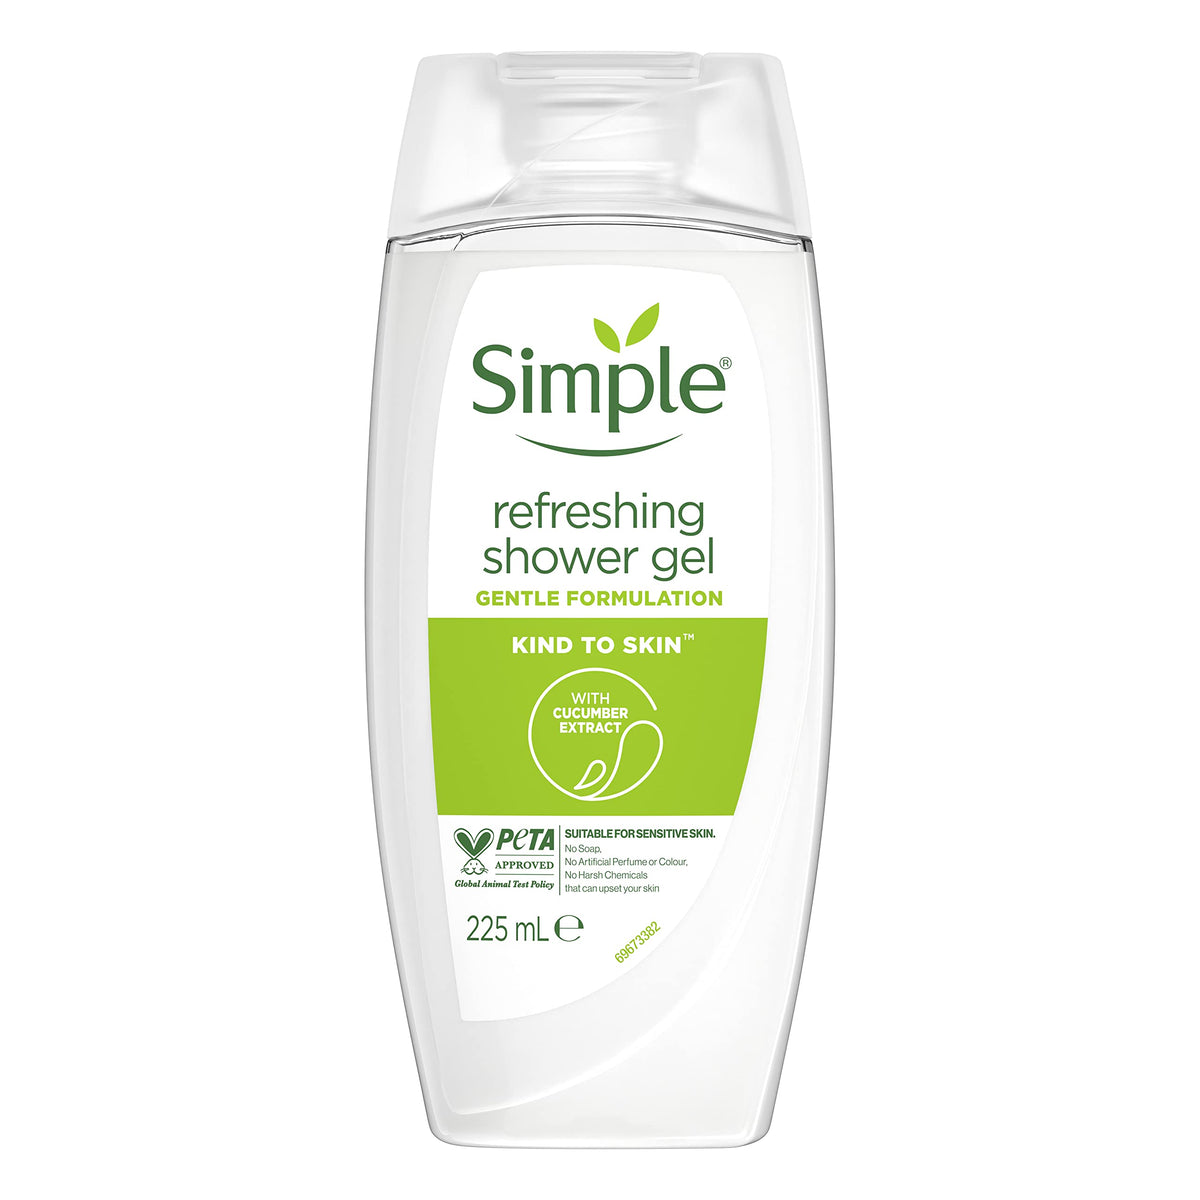 Simple Refreshing Shower Gel body wash with natural cucumber extract for dry skin 6x 225 ml